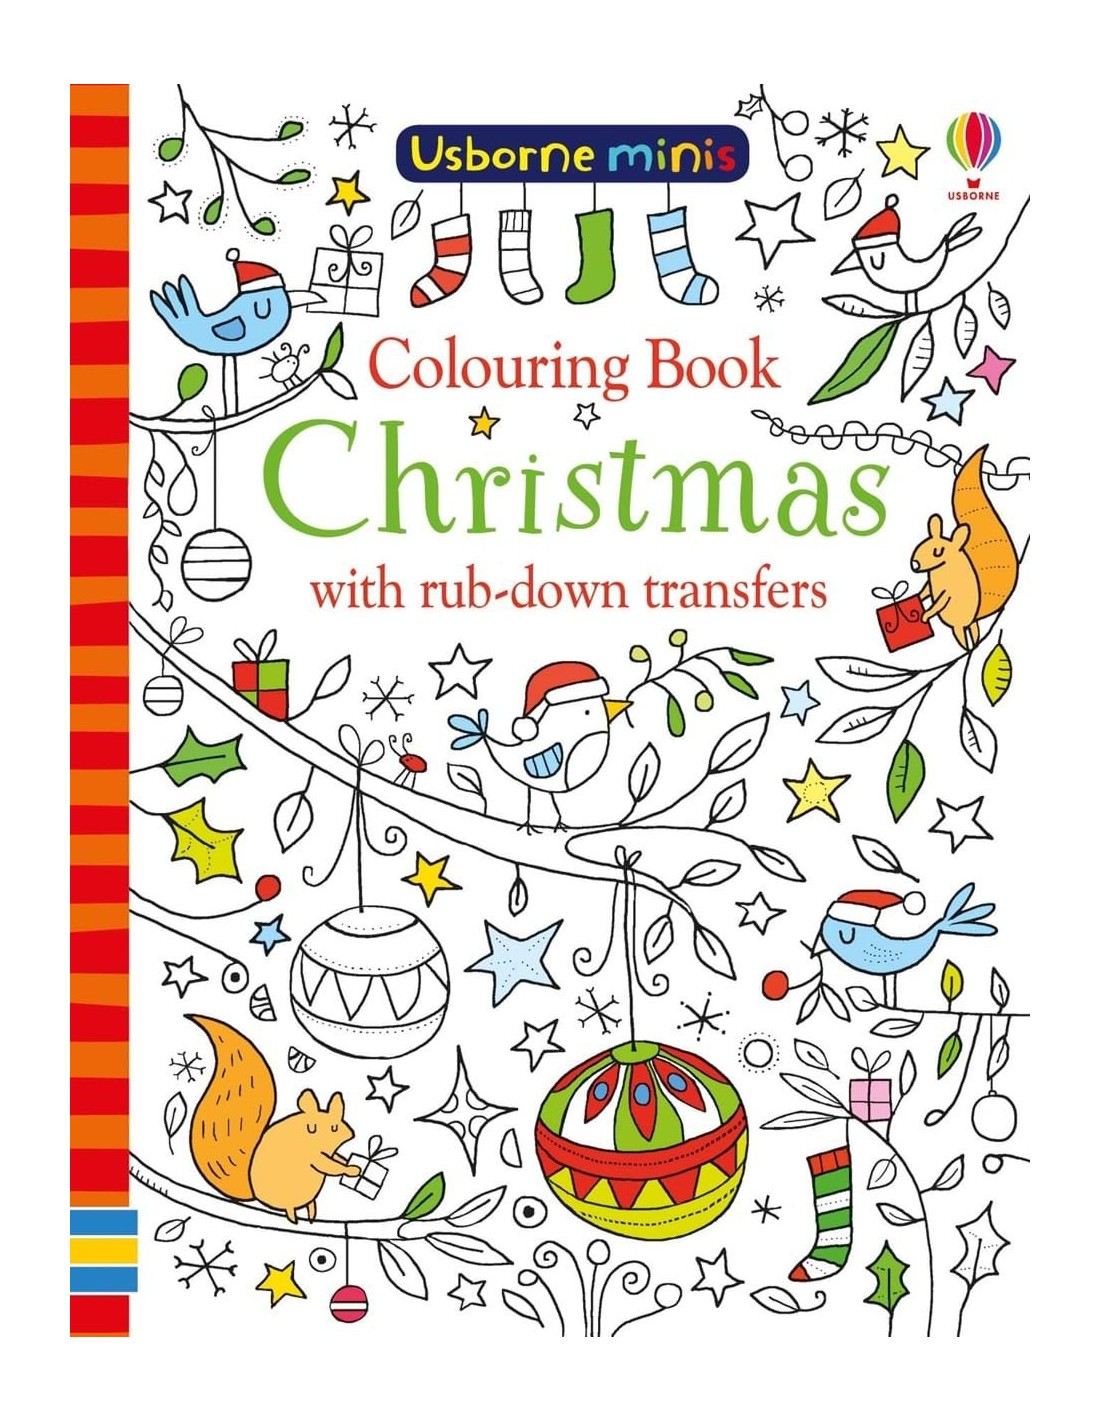 Colouring book Christmas with rub-down transfers